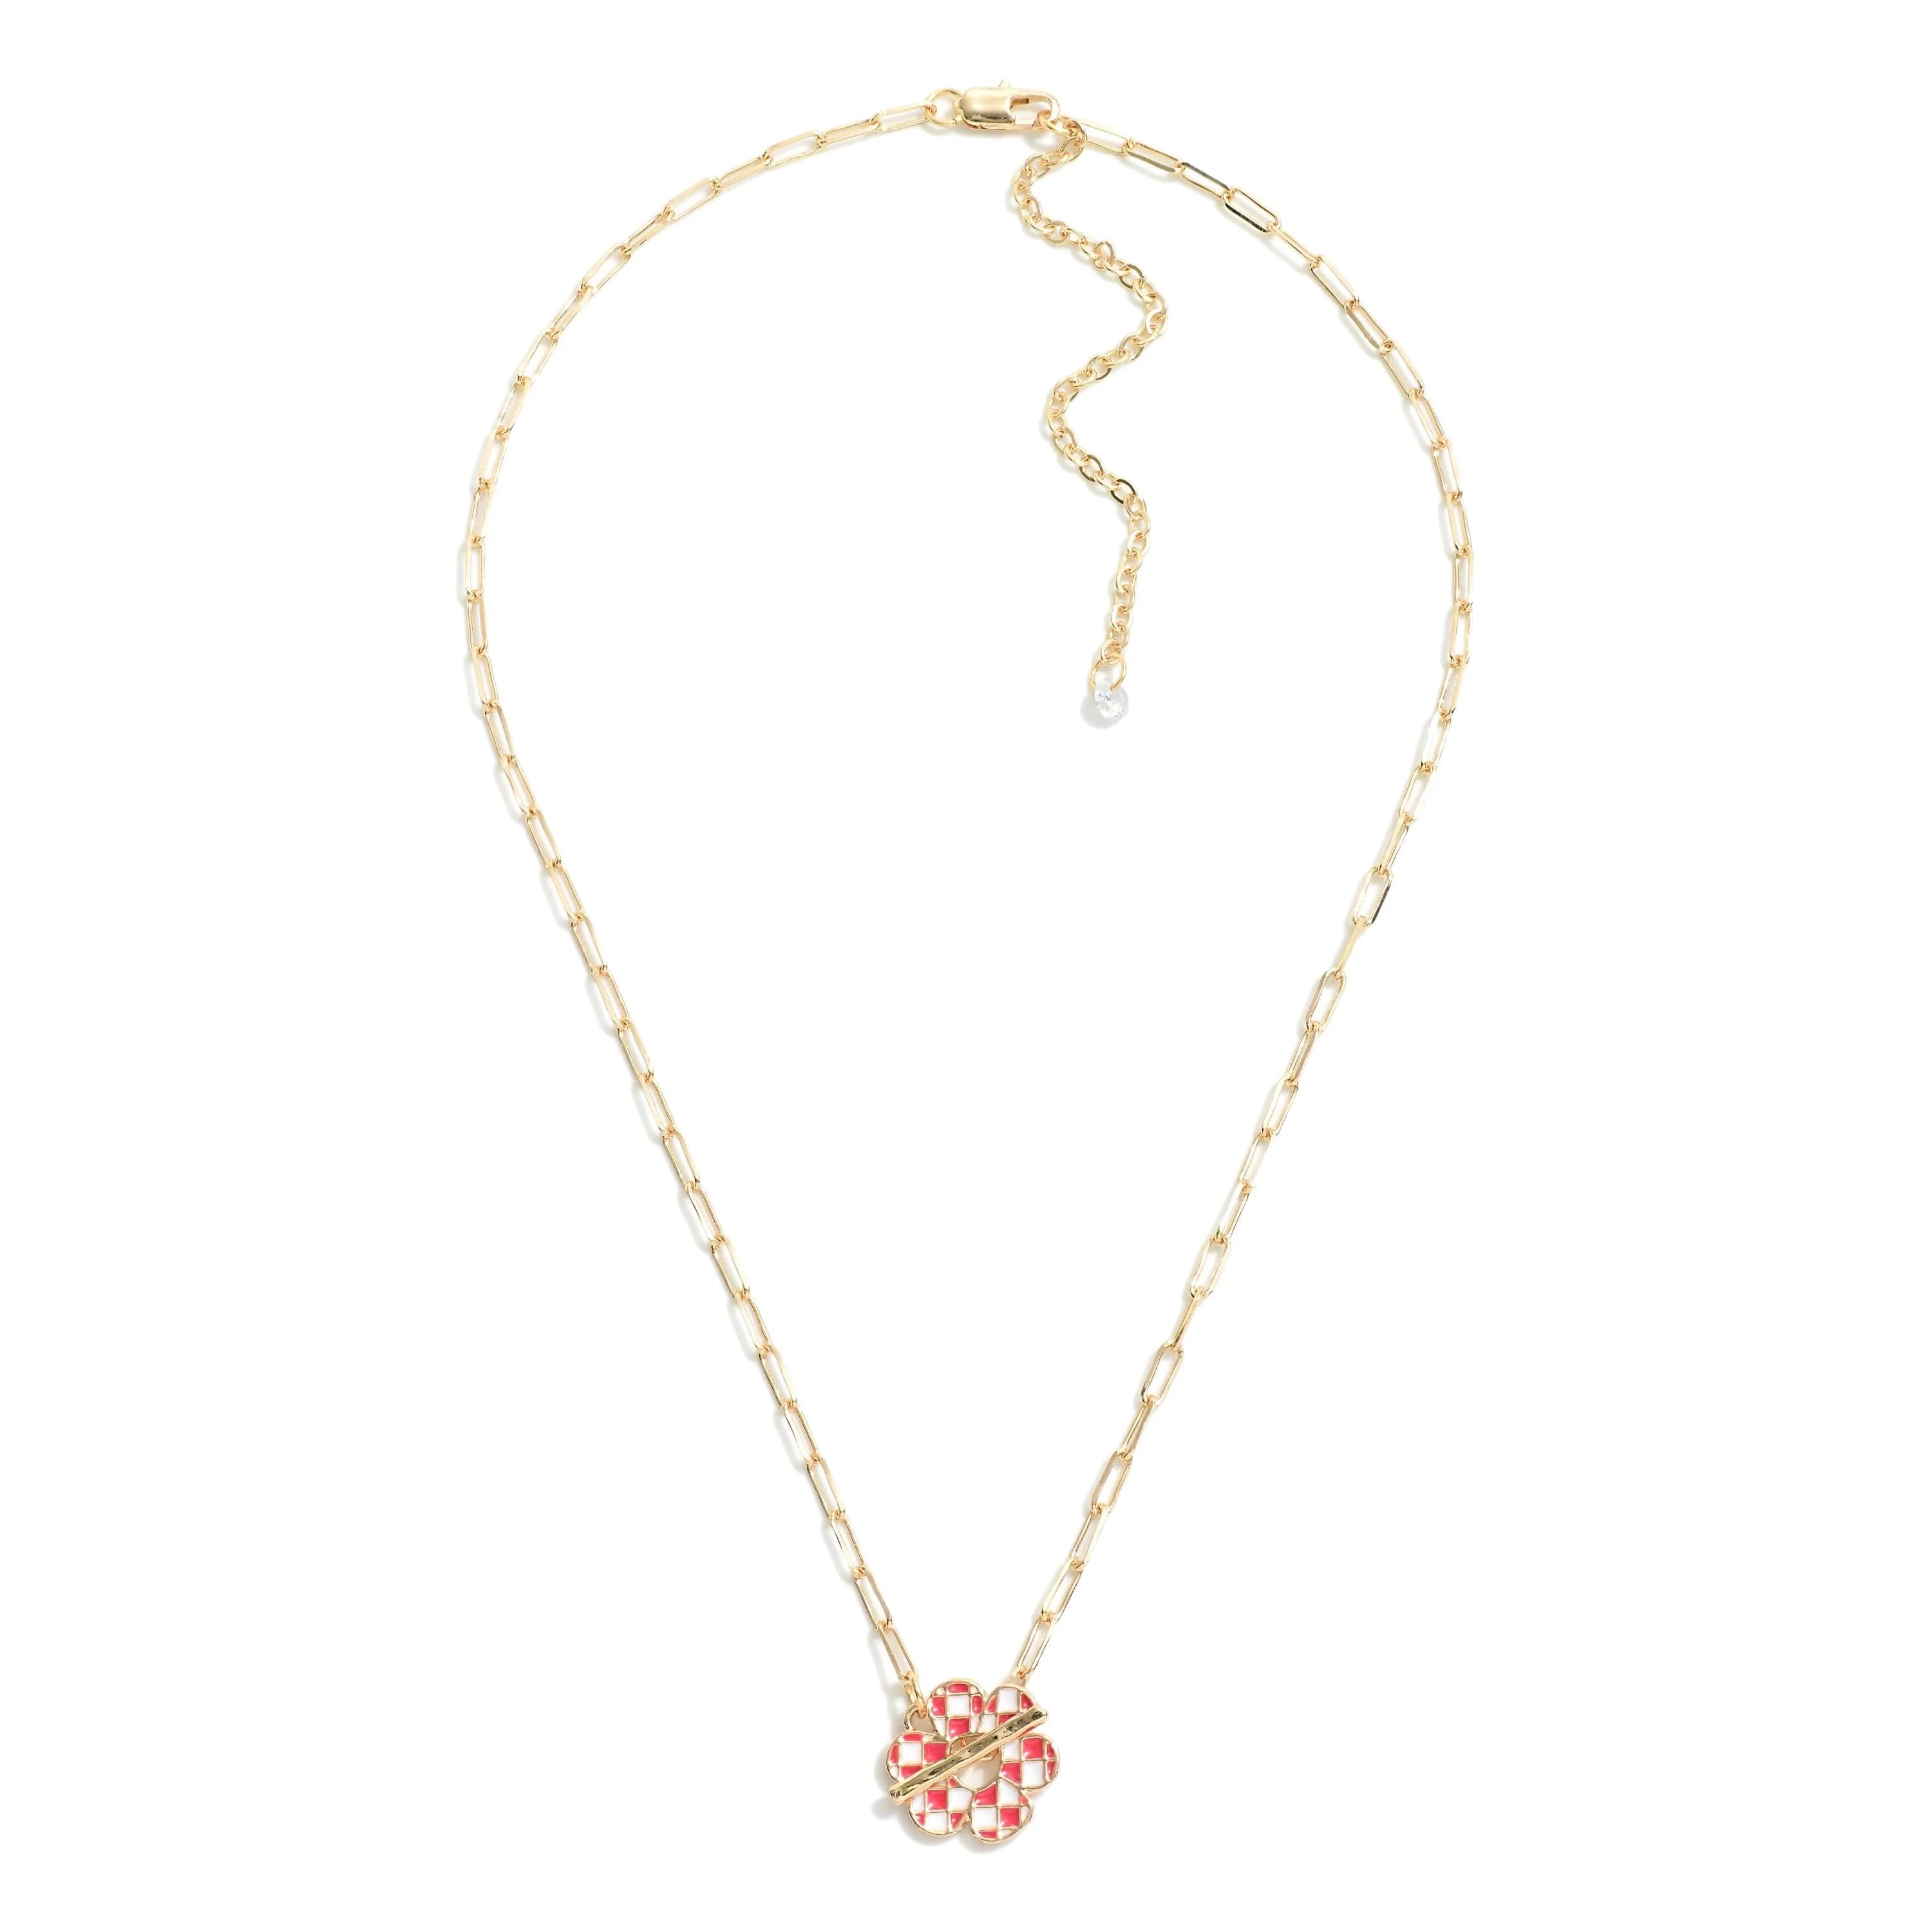 Checkered Enamel Flower Charm Necklace With Toggle Clasp Gold